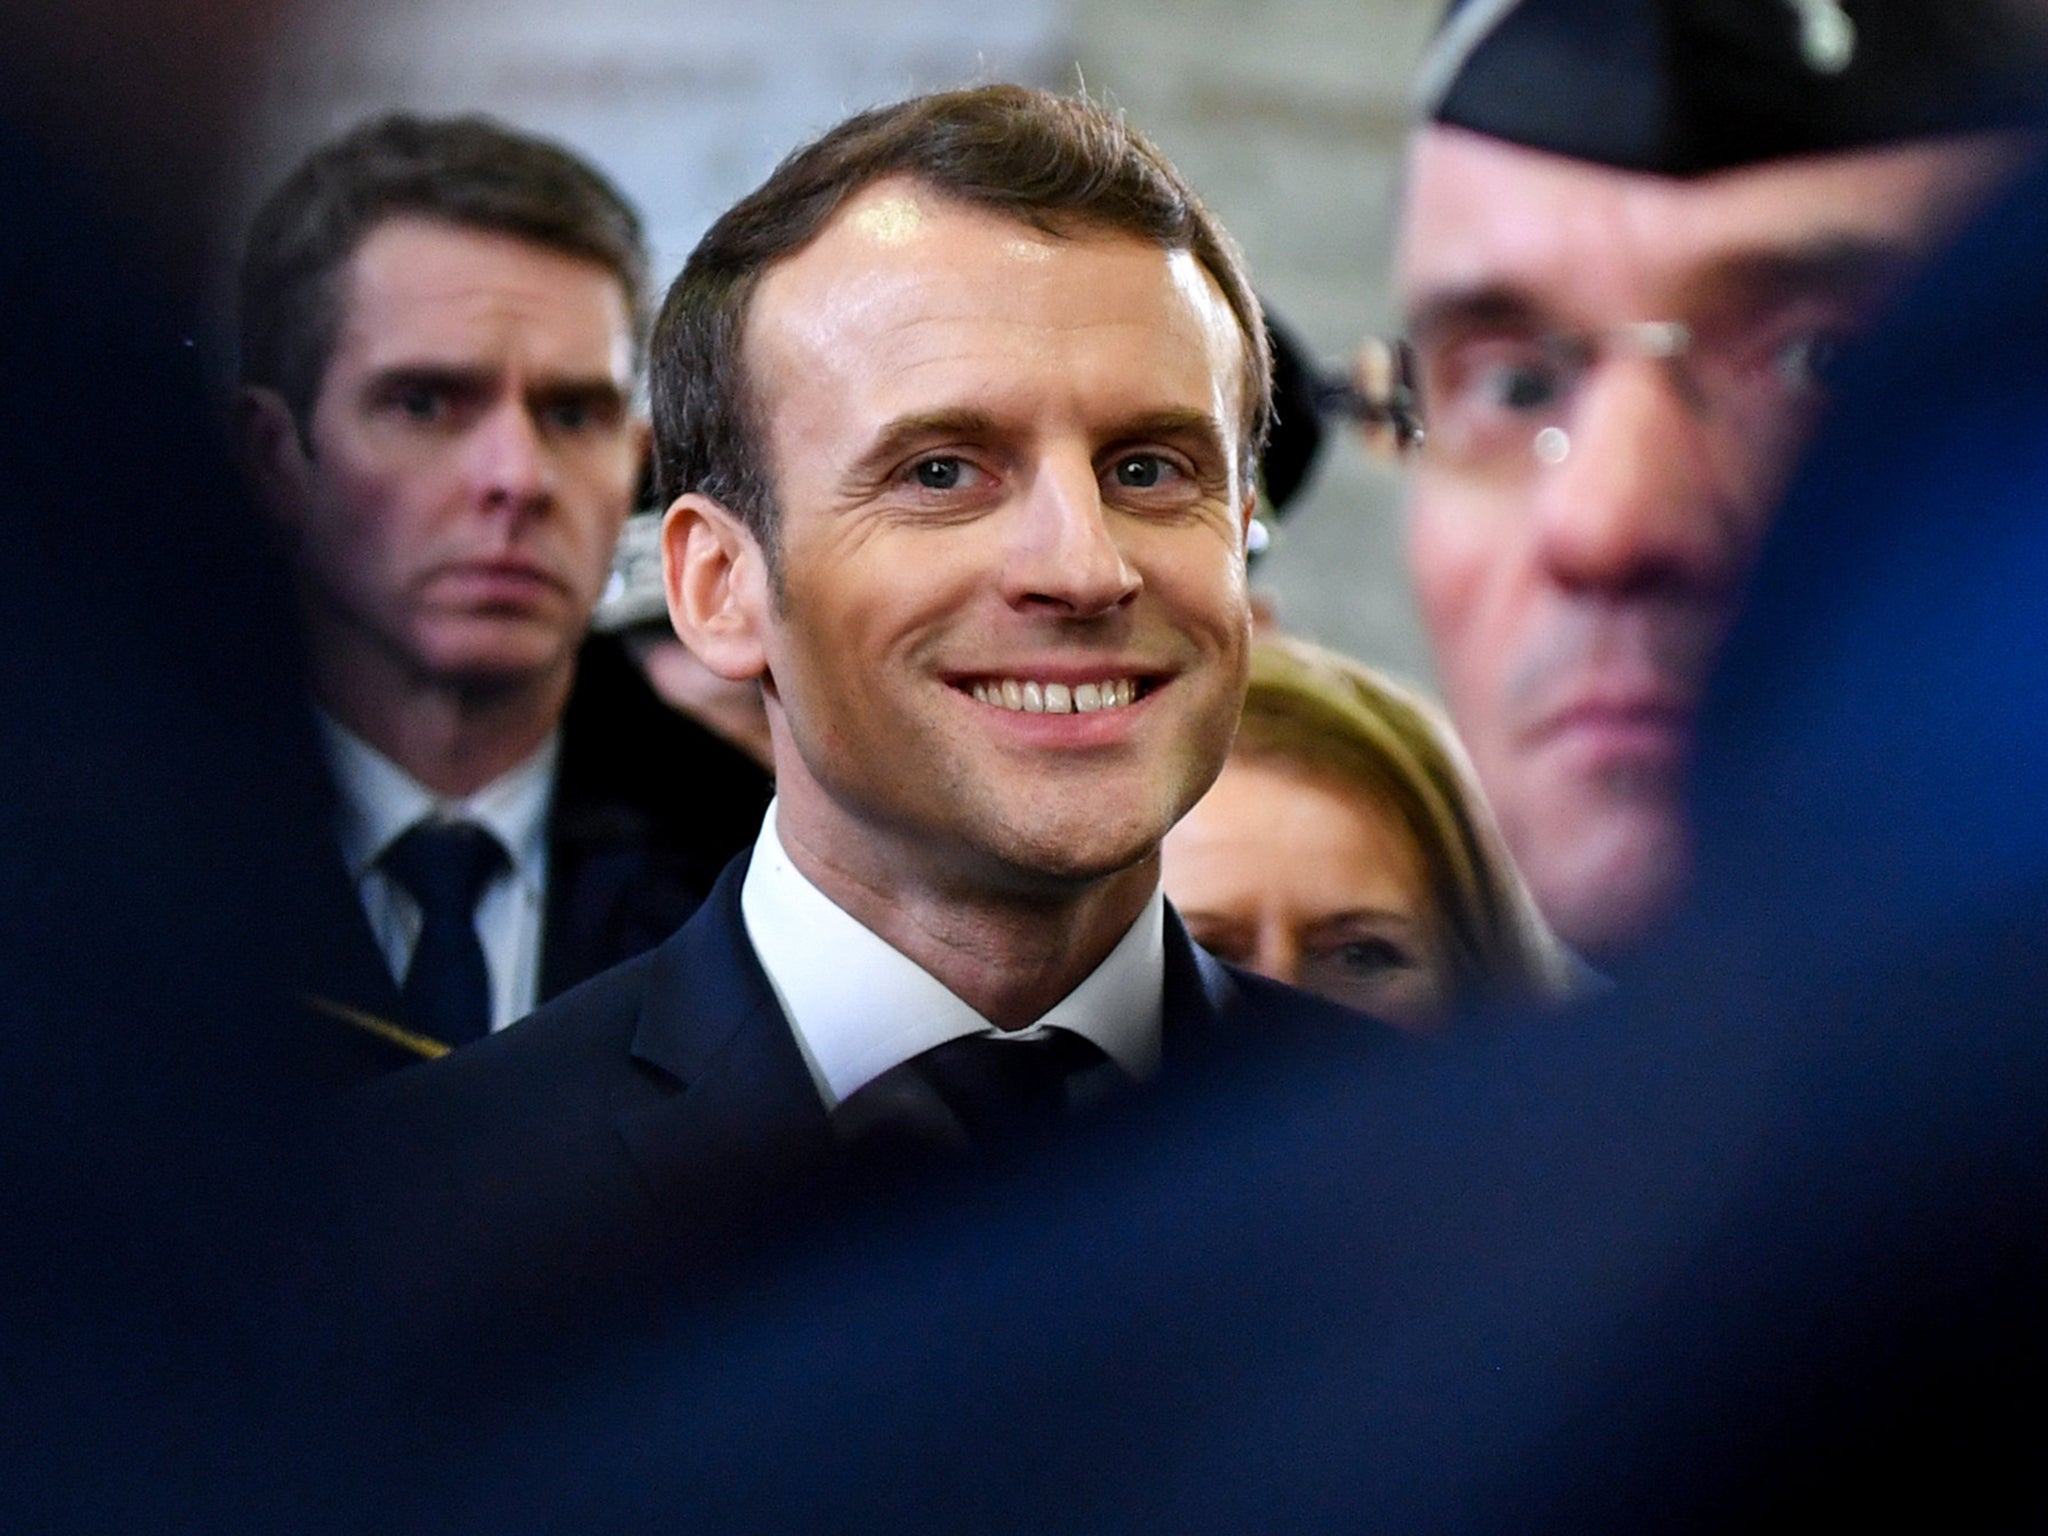 There is an undoubted arrogance about Macron. No one is better pleased with him than himself